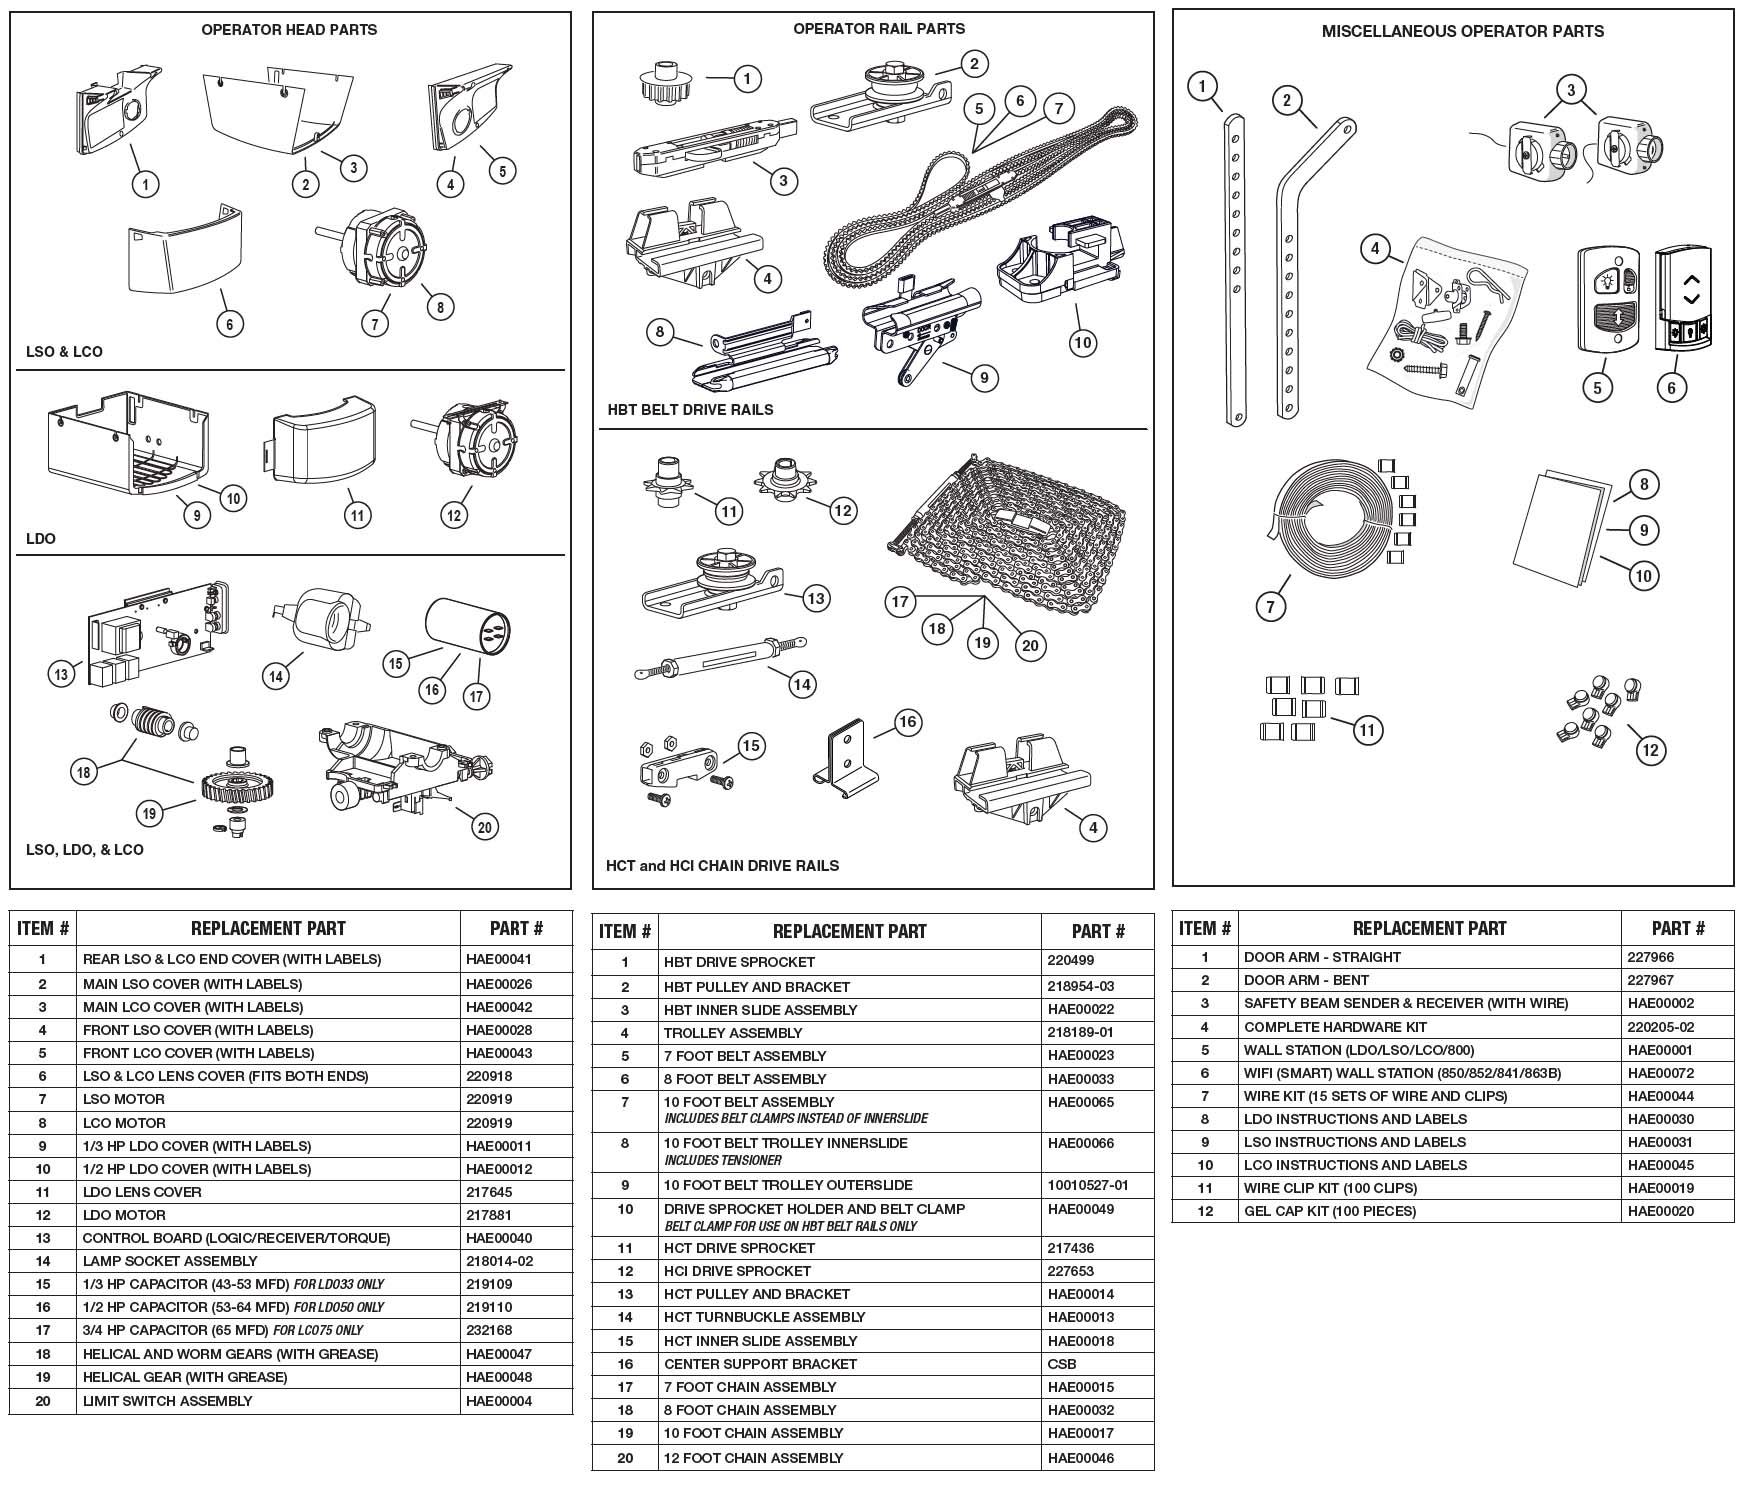 Linear LSO50, LSO50-2T1KB and LSO50-2T1KB8 Garage Door Opener Parts Diagram and List